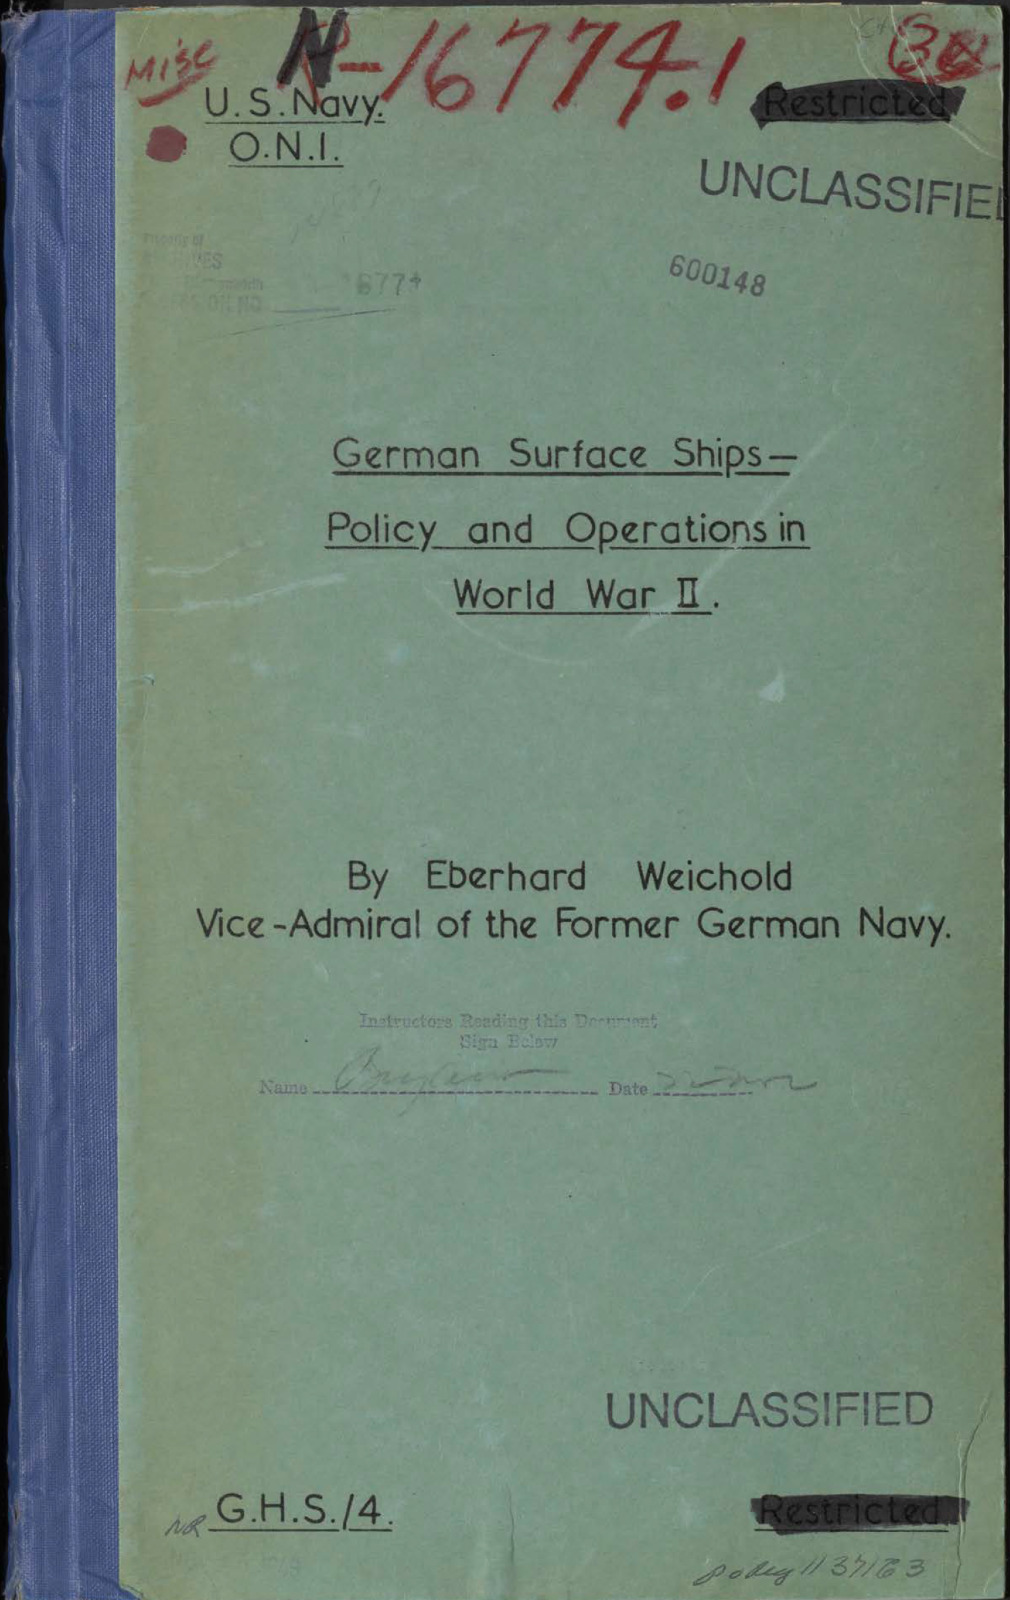 238 Page German Surface Ships Policy and Operations in World War II On Data CD